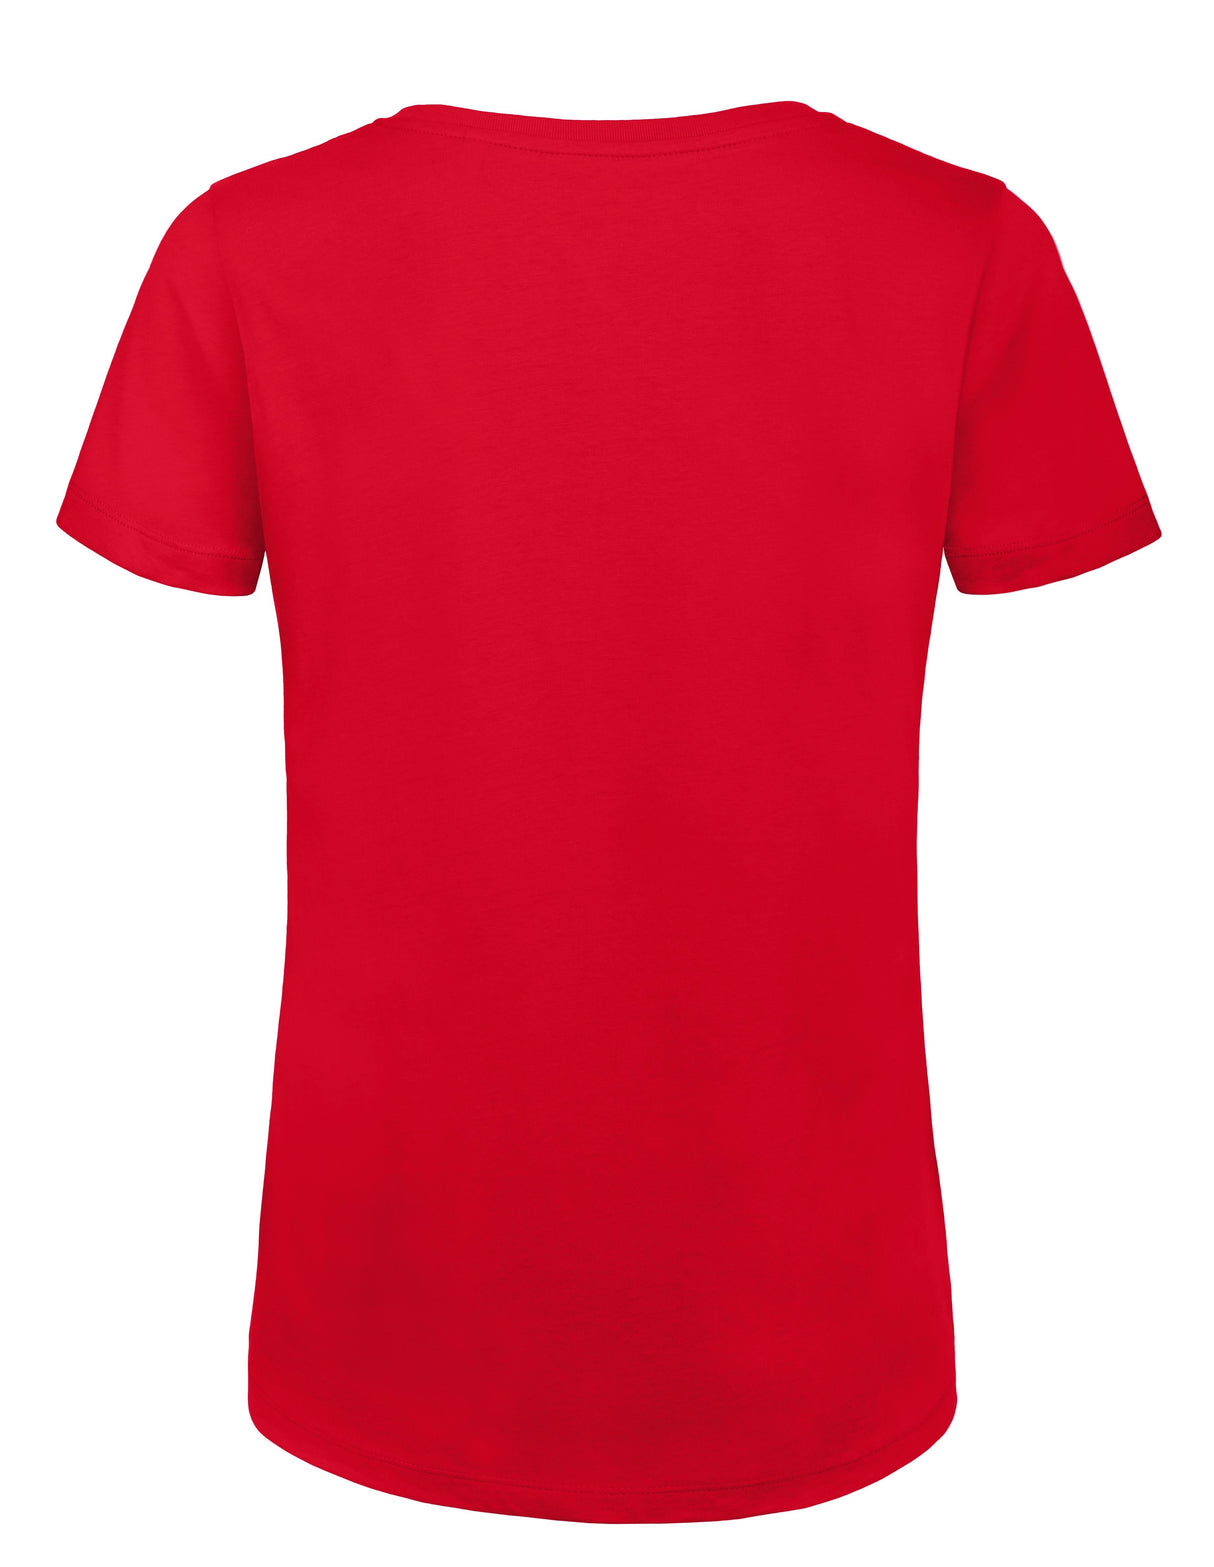 B&C Collection Inspire T Women - Red